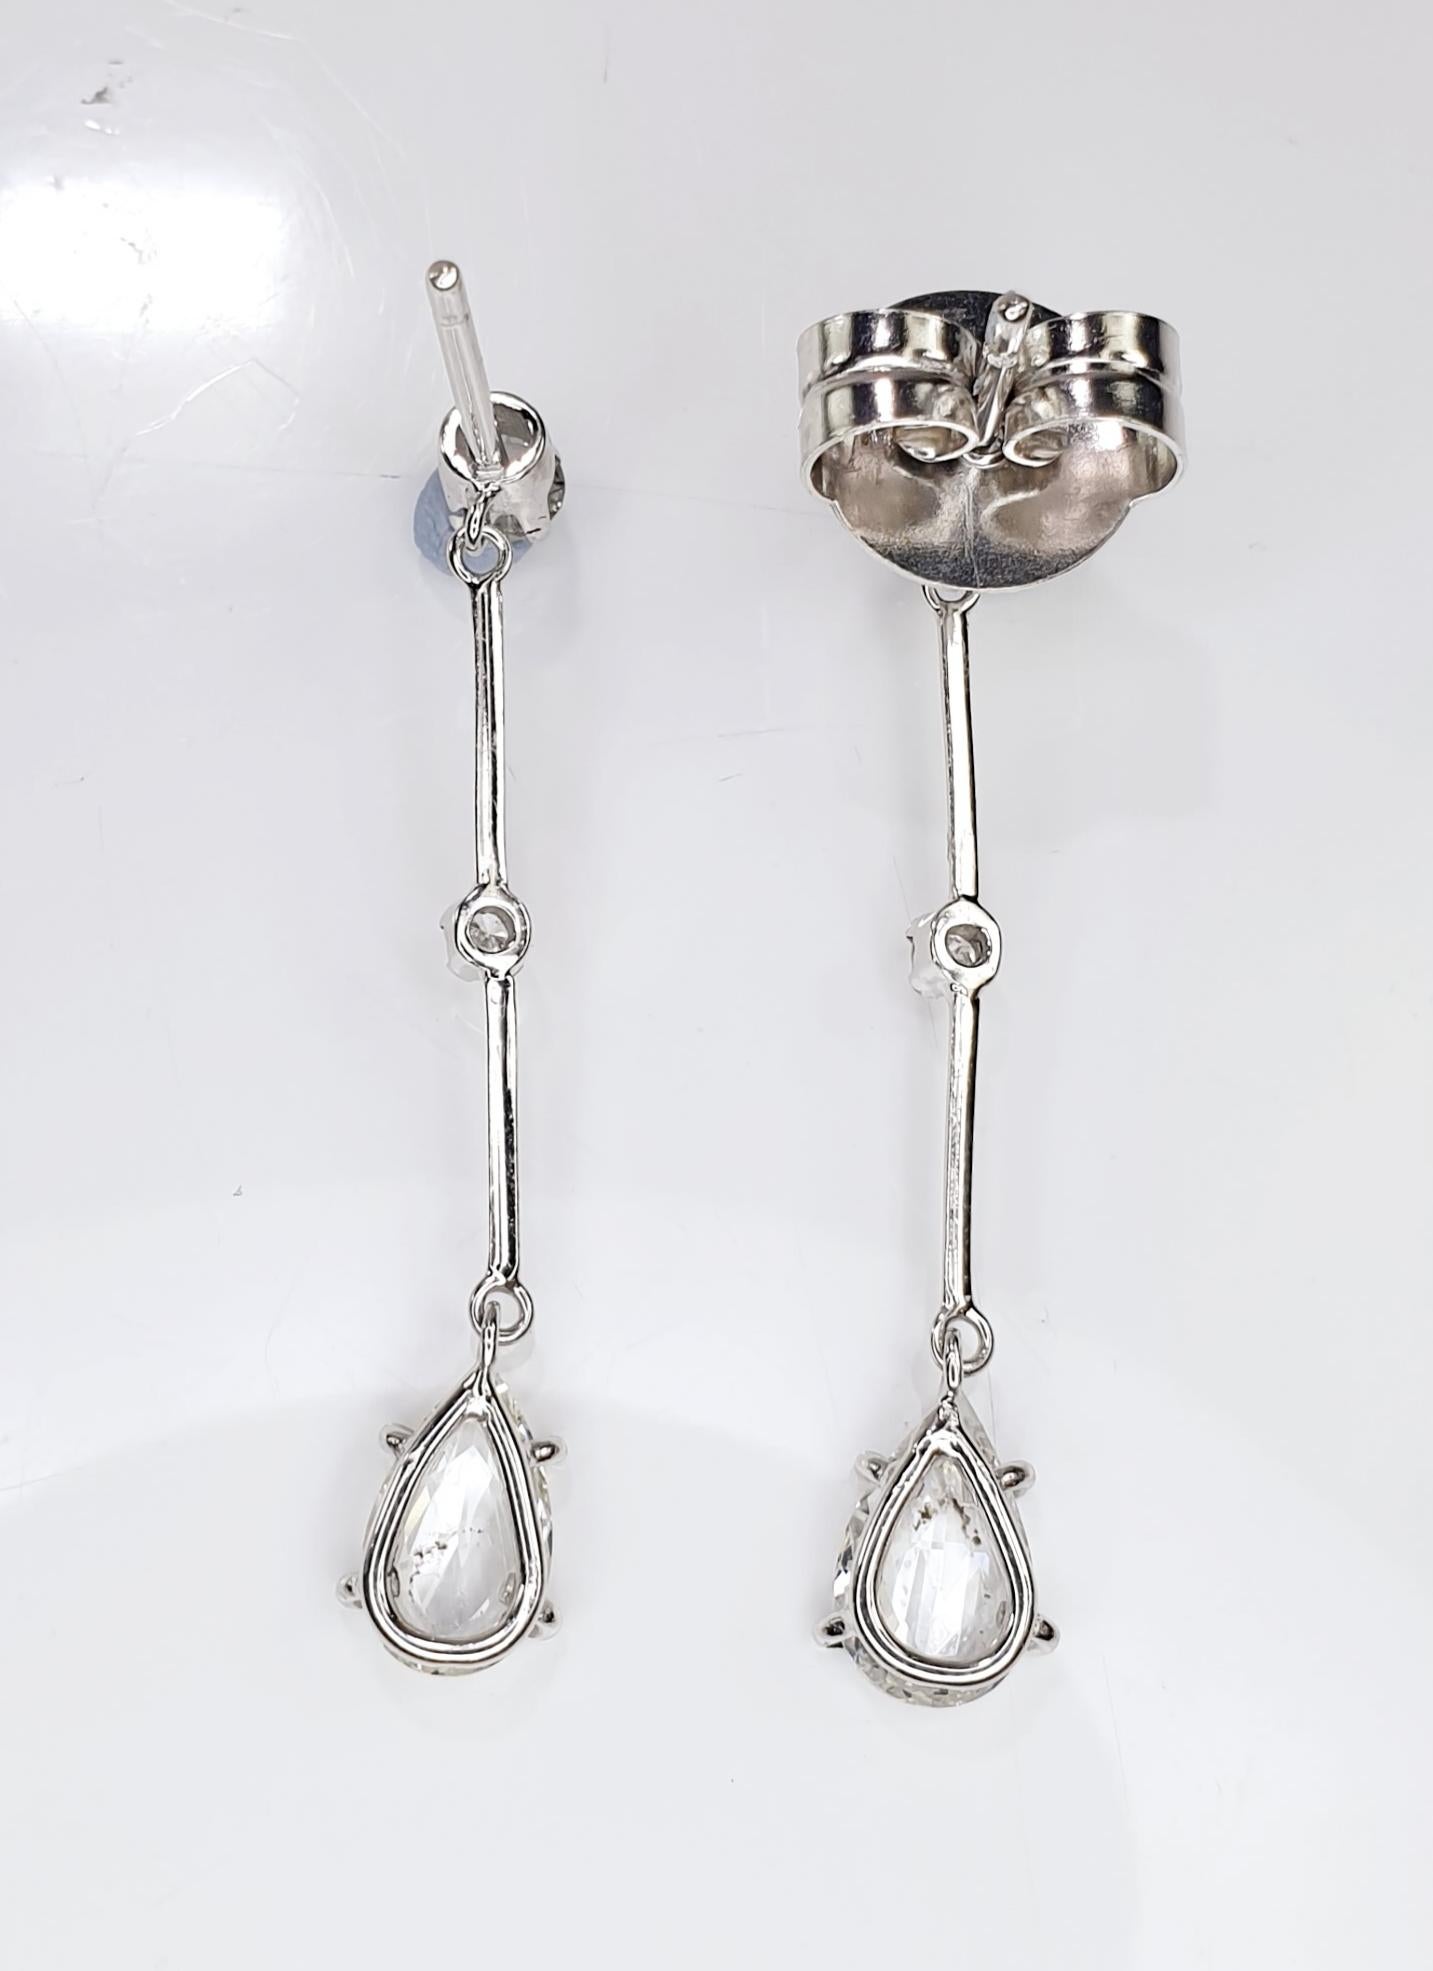 There are no rules when it comes to jewellery! 
Crafted from 18kt white gold, these romantic, pure simple line diamond pear drop earrings   can be used all day long. 
Let them stop and stare!

READY TO SHIP
*Shipment of this piece is not affected by